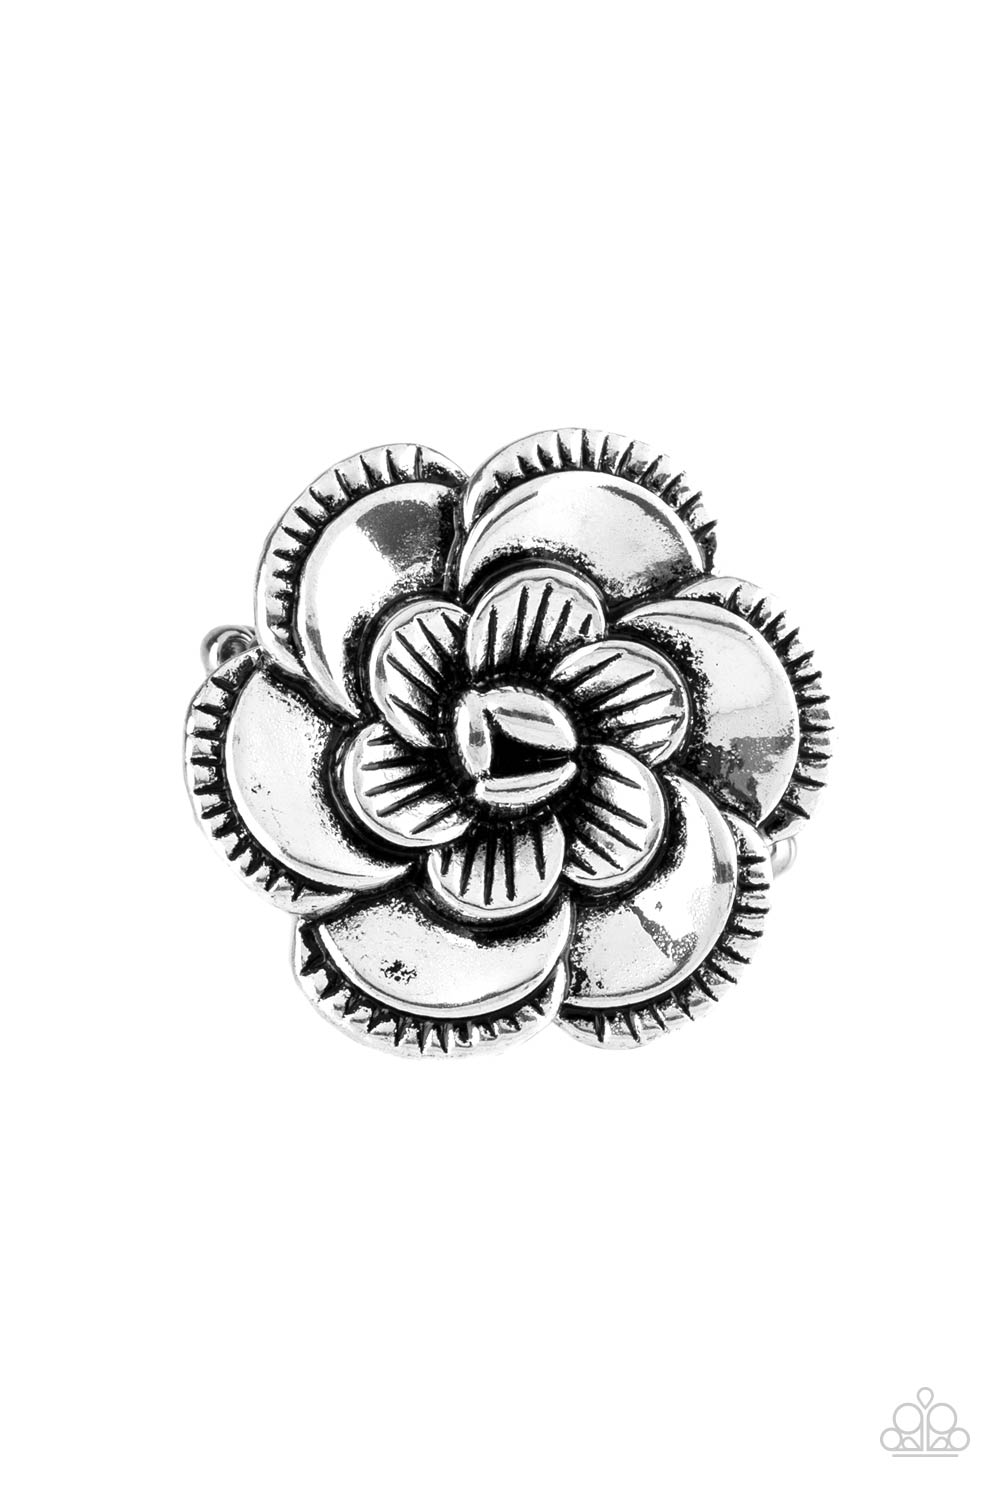 Rippling in ornate detail, folds of silver petals bloom atop the finger for a seasonal look. Features a stretchy band for a flexible fit.